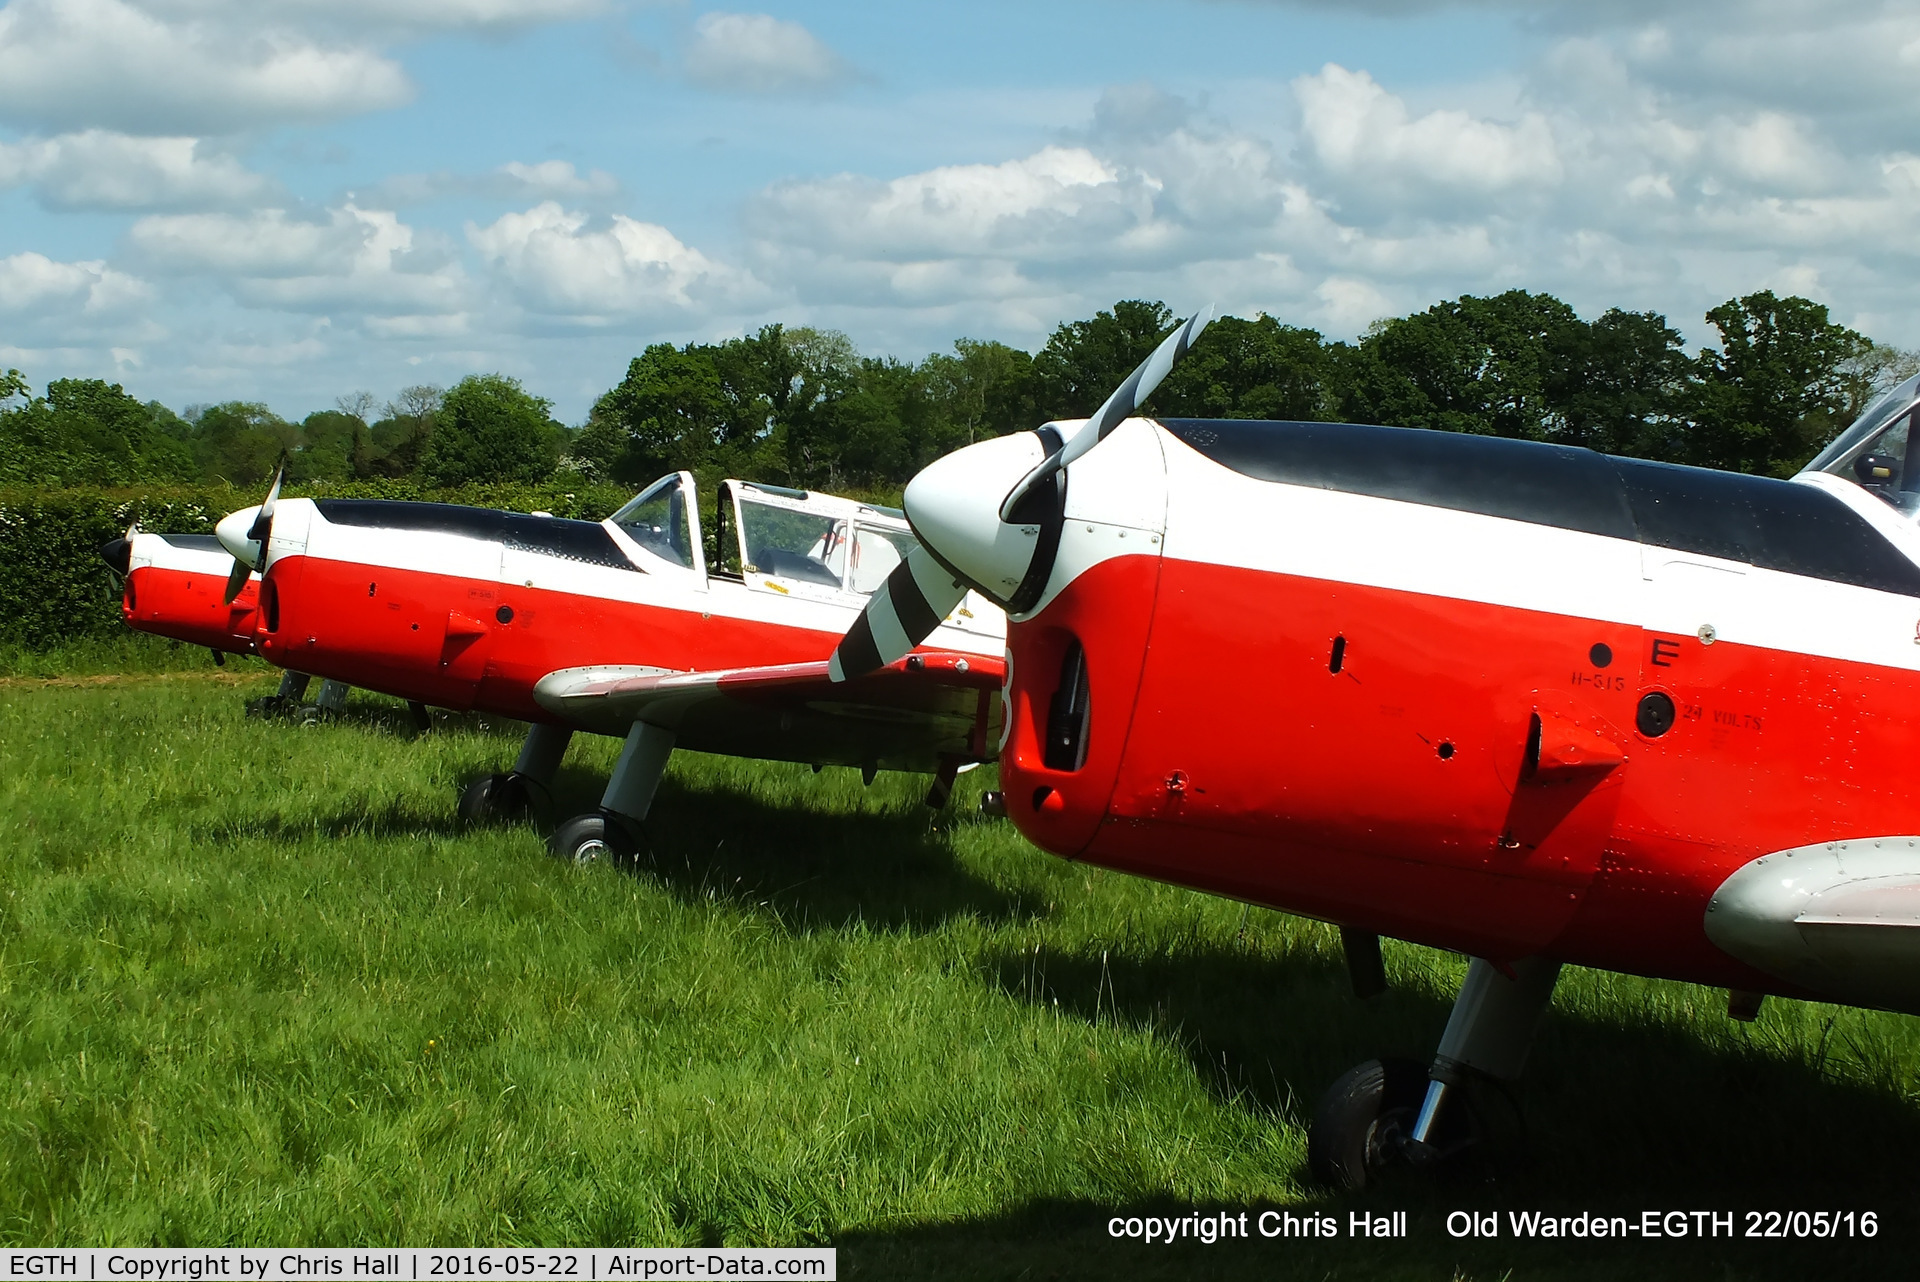 EGTH Airport - 70th Anniversary of the first flight of the de Havilland Chipmunk  Fly-In at Old Warden